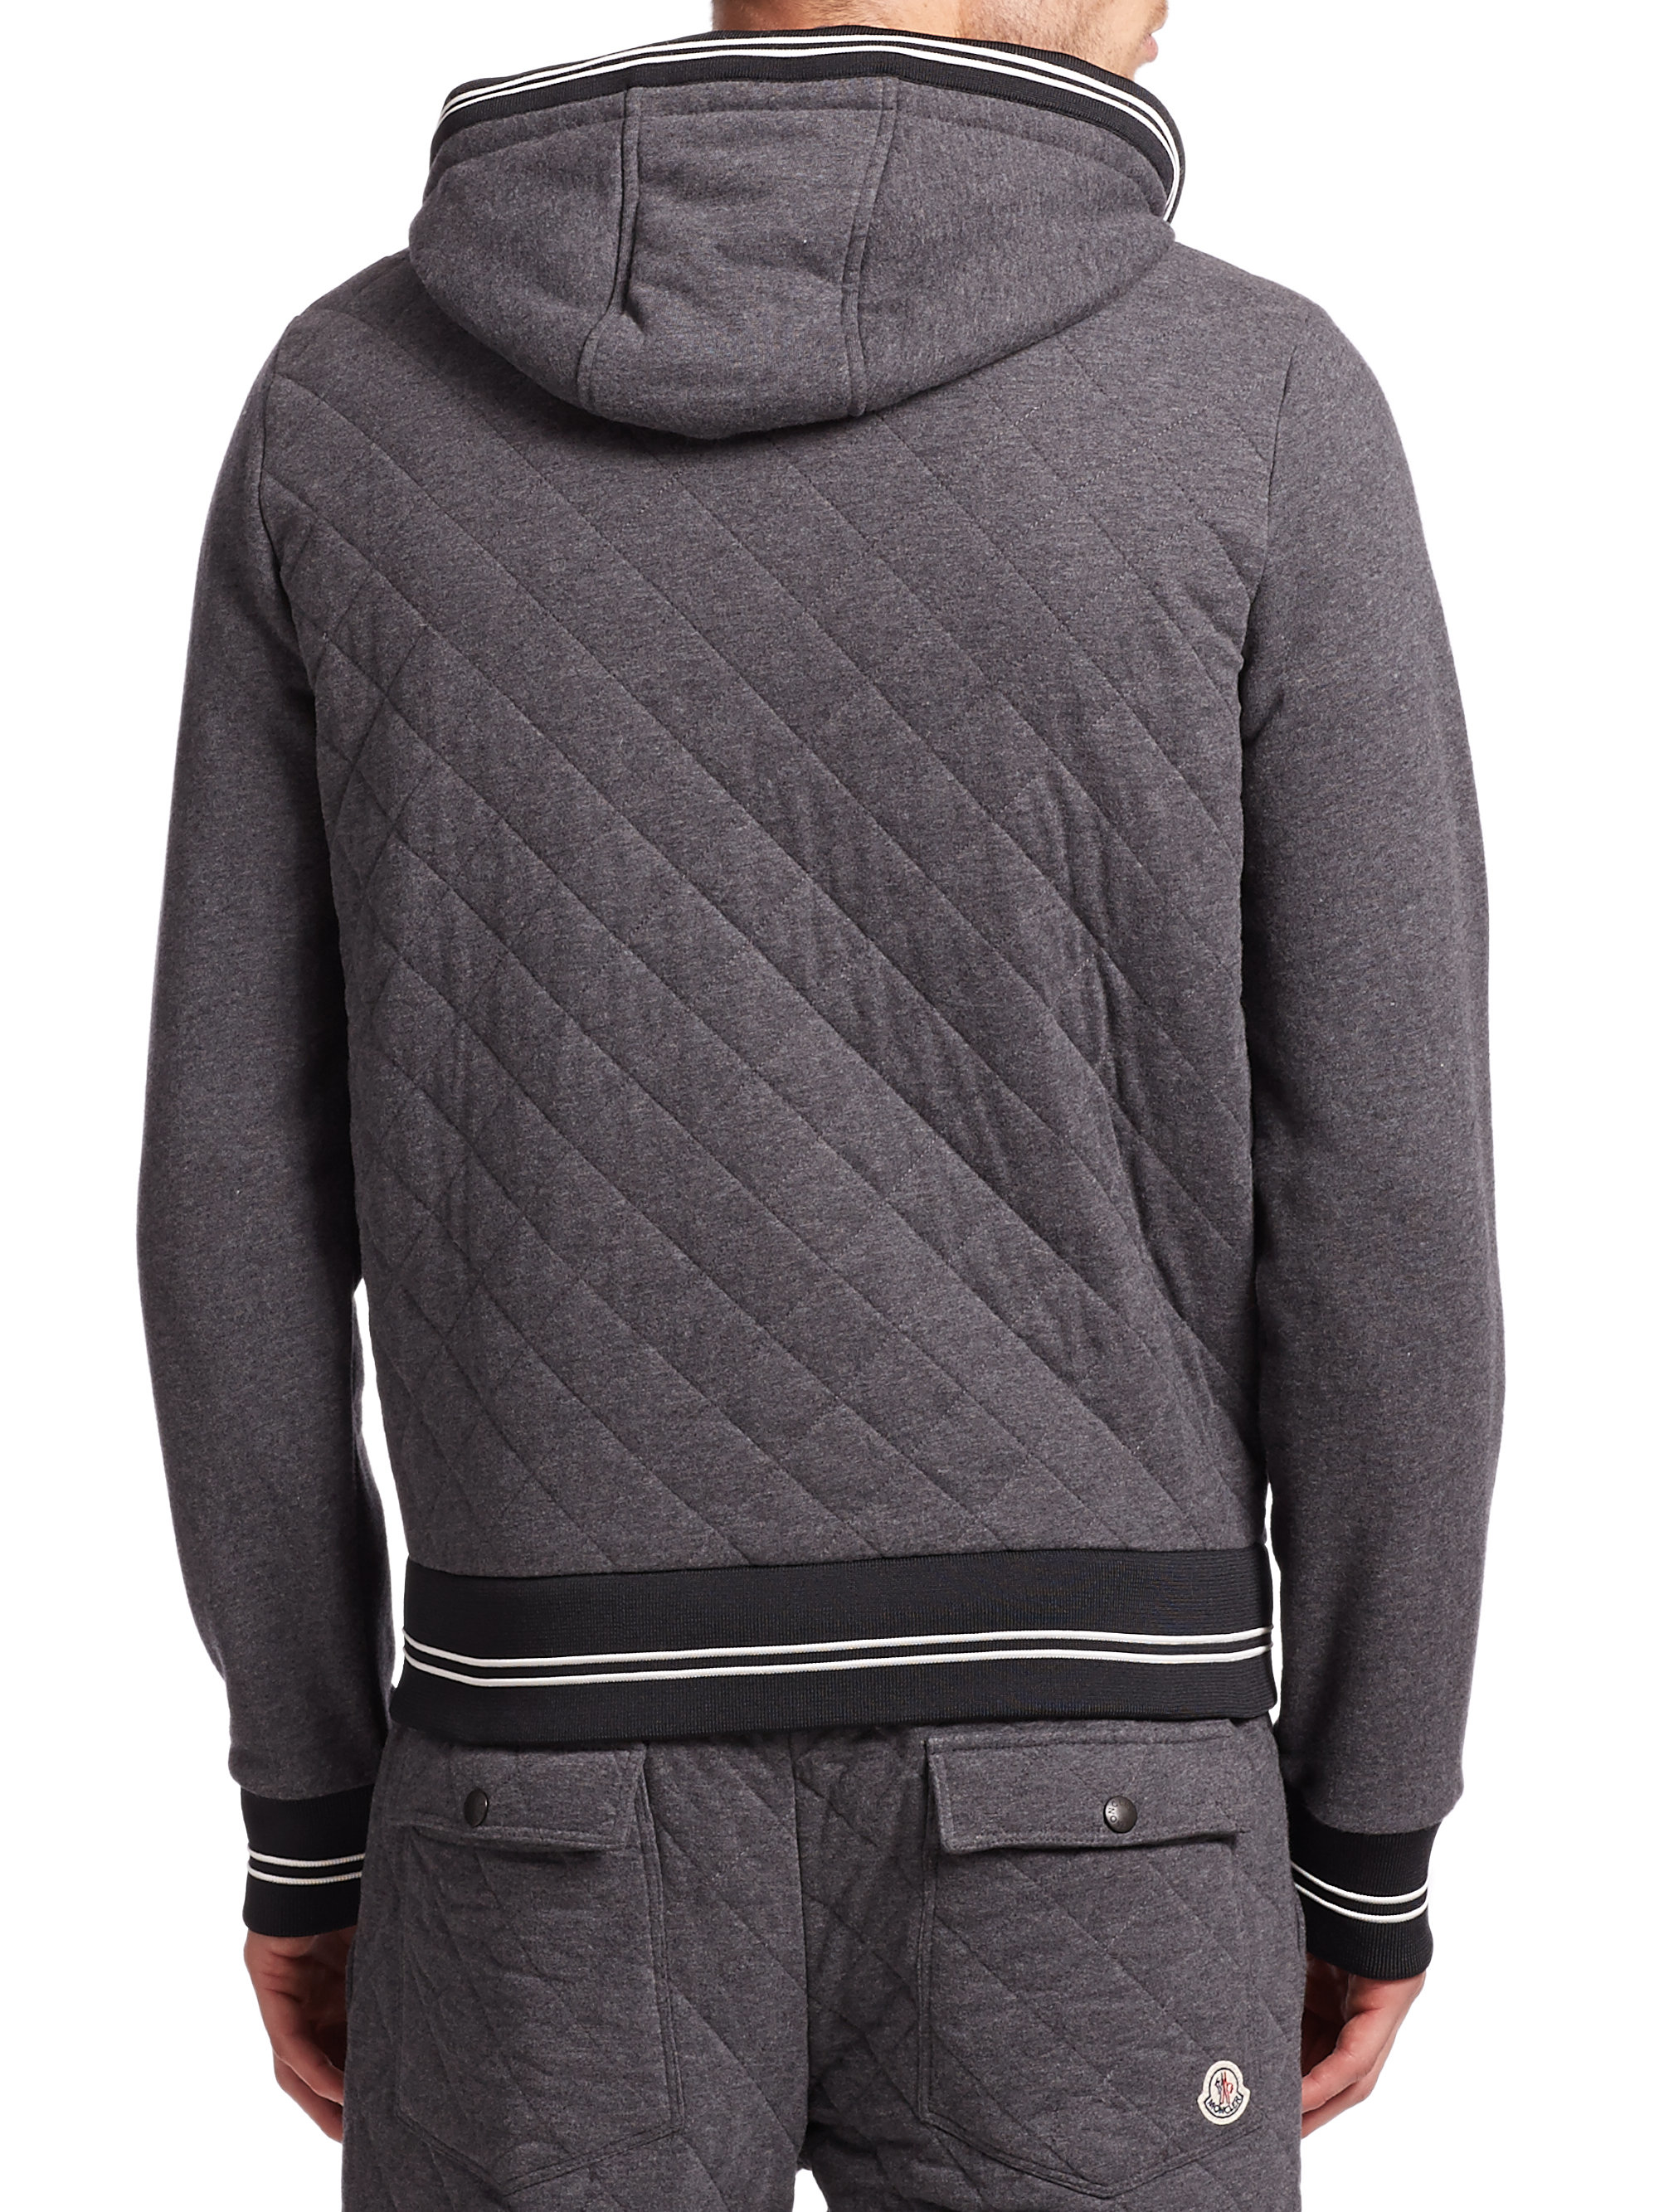 Lyst - Moncler Maglia Quilted Banded Cotton Hoodie in Gray for Men